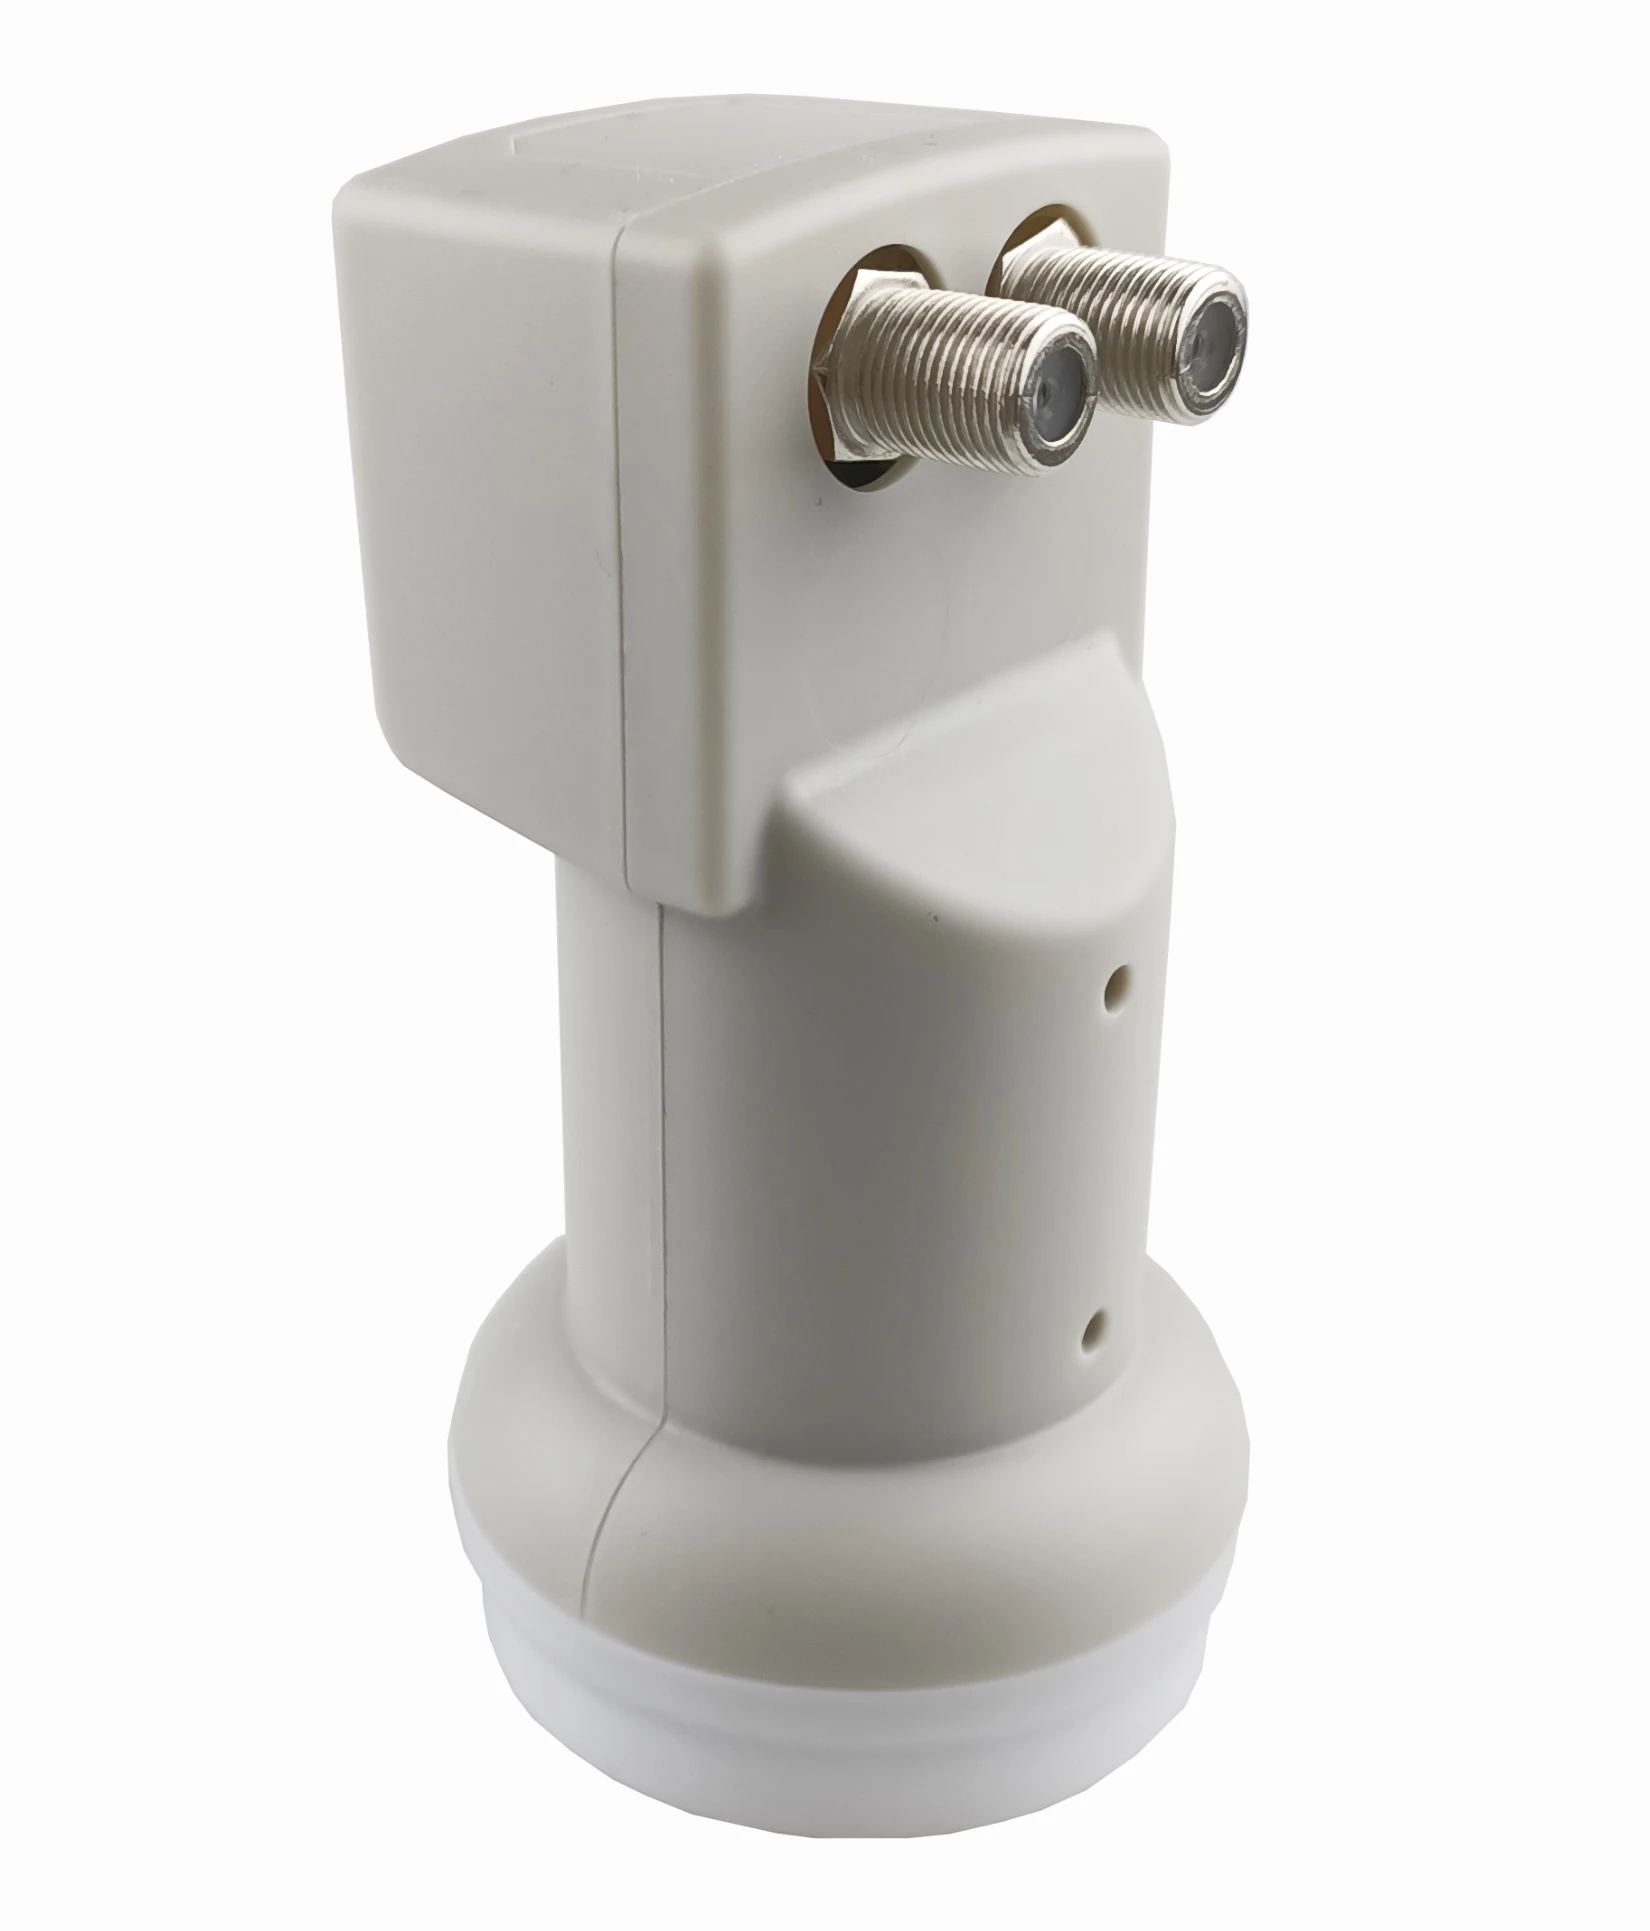 OPENSAT 2021 Hot Selling In India Best Price And Good Quality Ku Band Lnb (1600325981338)